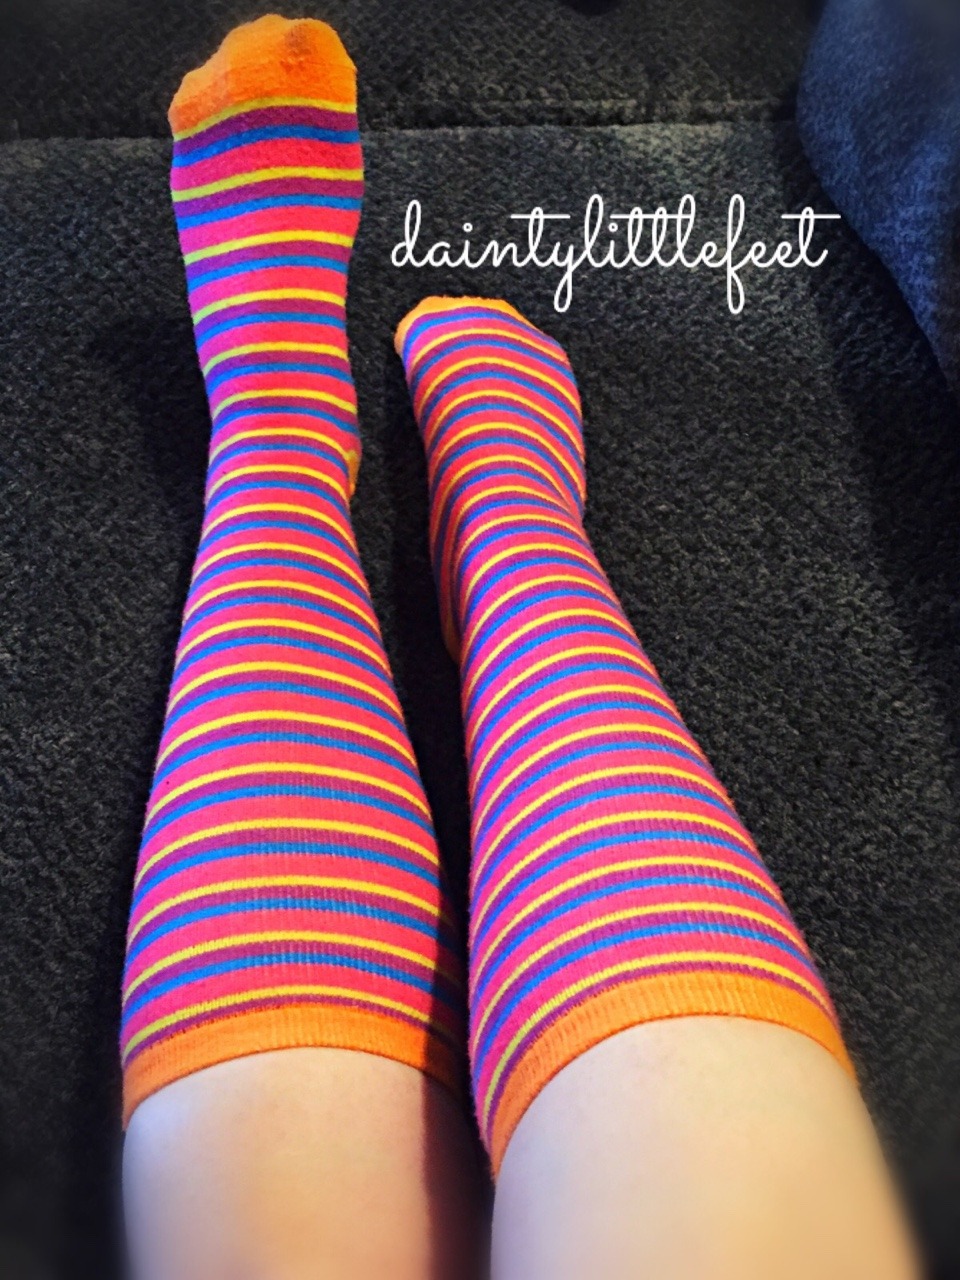 daintylittlefeet-my-feet-are-so-cold-today-but-i-ll-take-my-socks